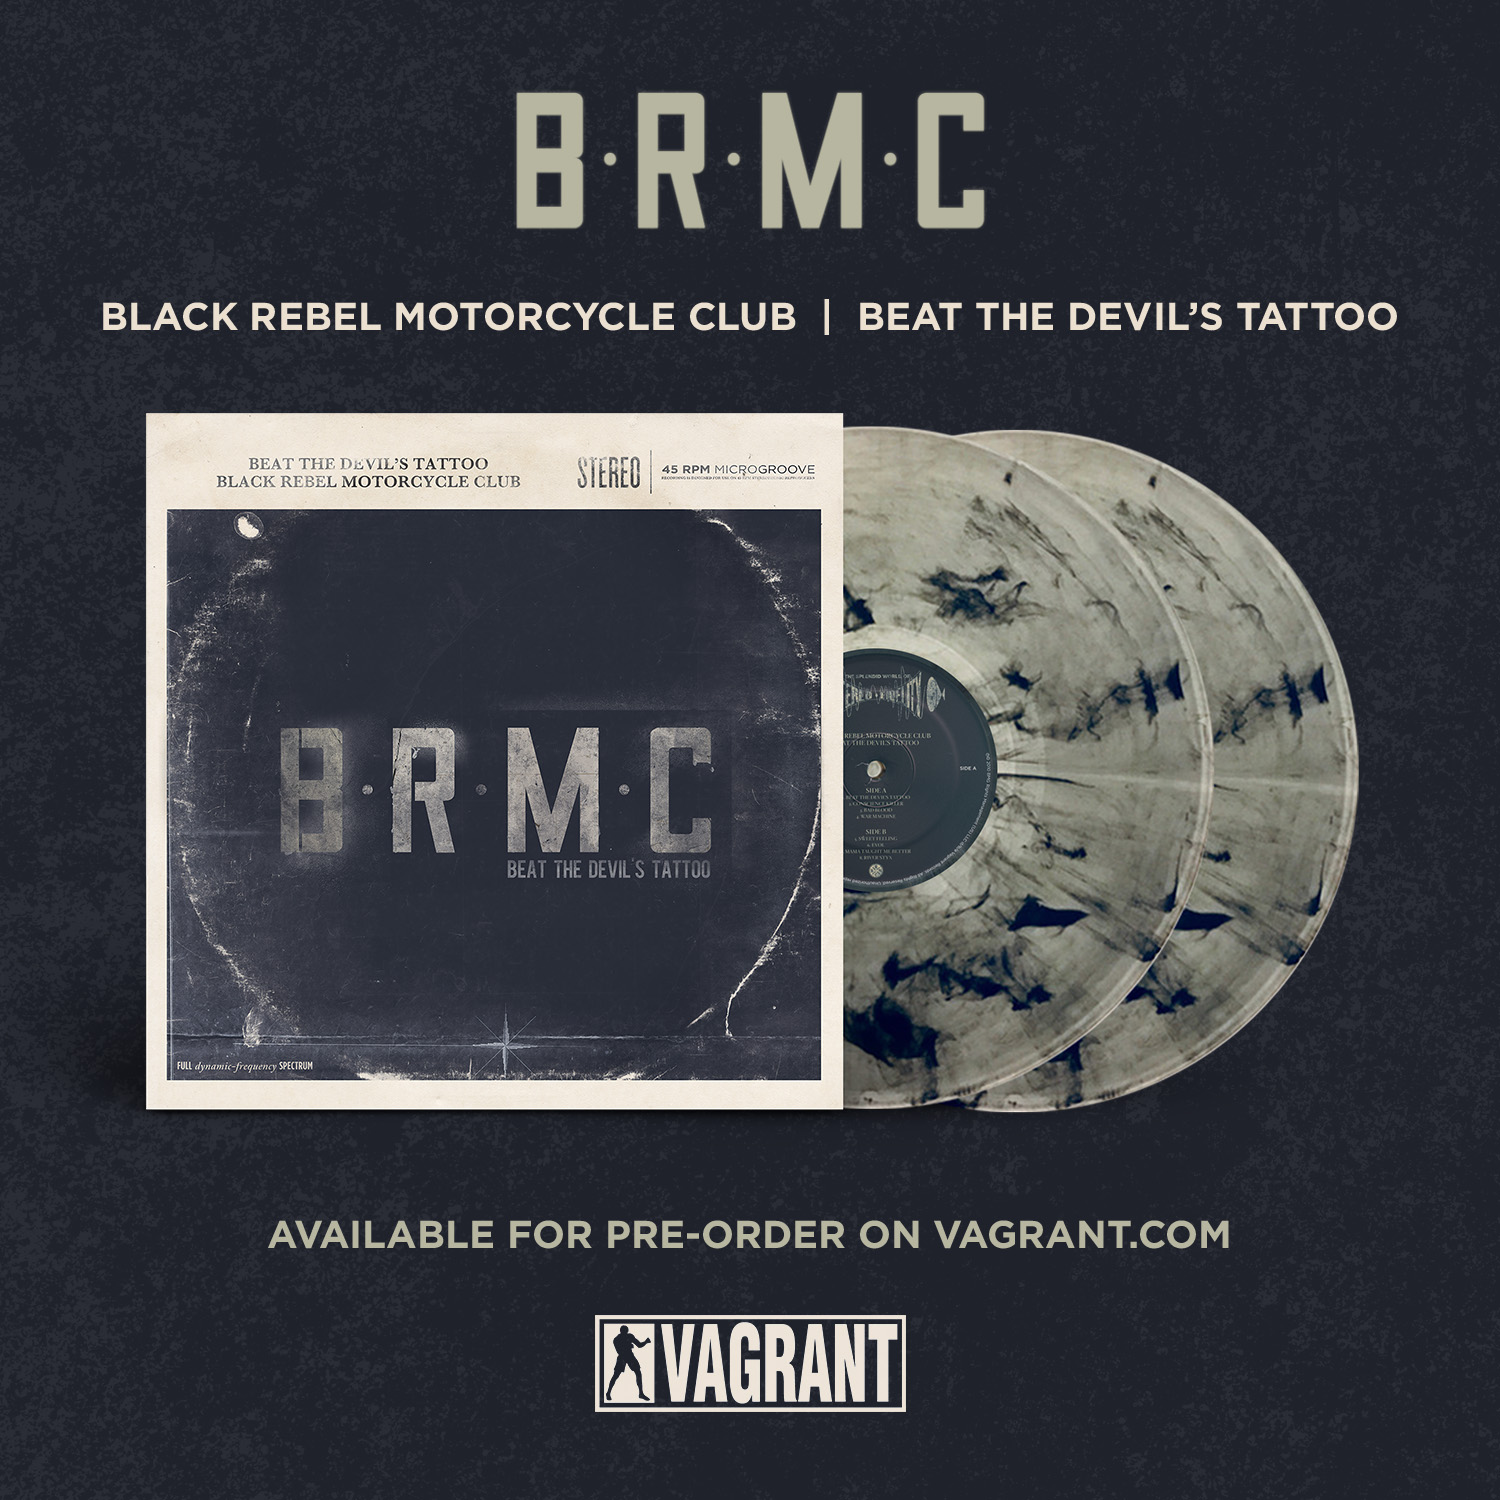 BRMCofficial on Twitter: 